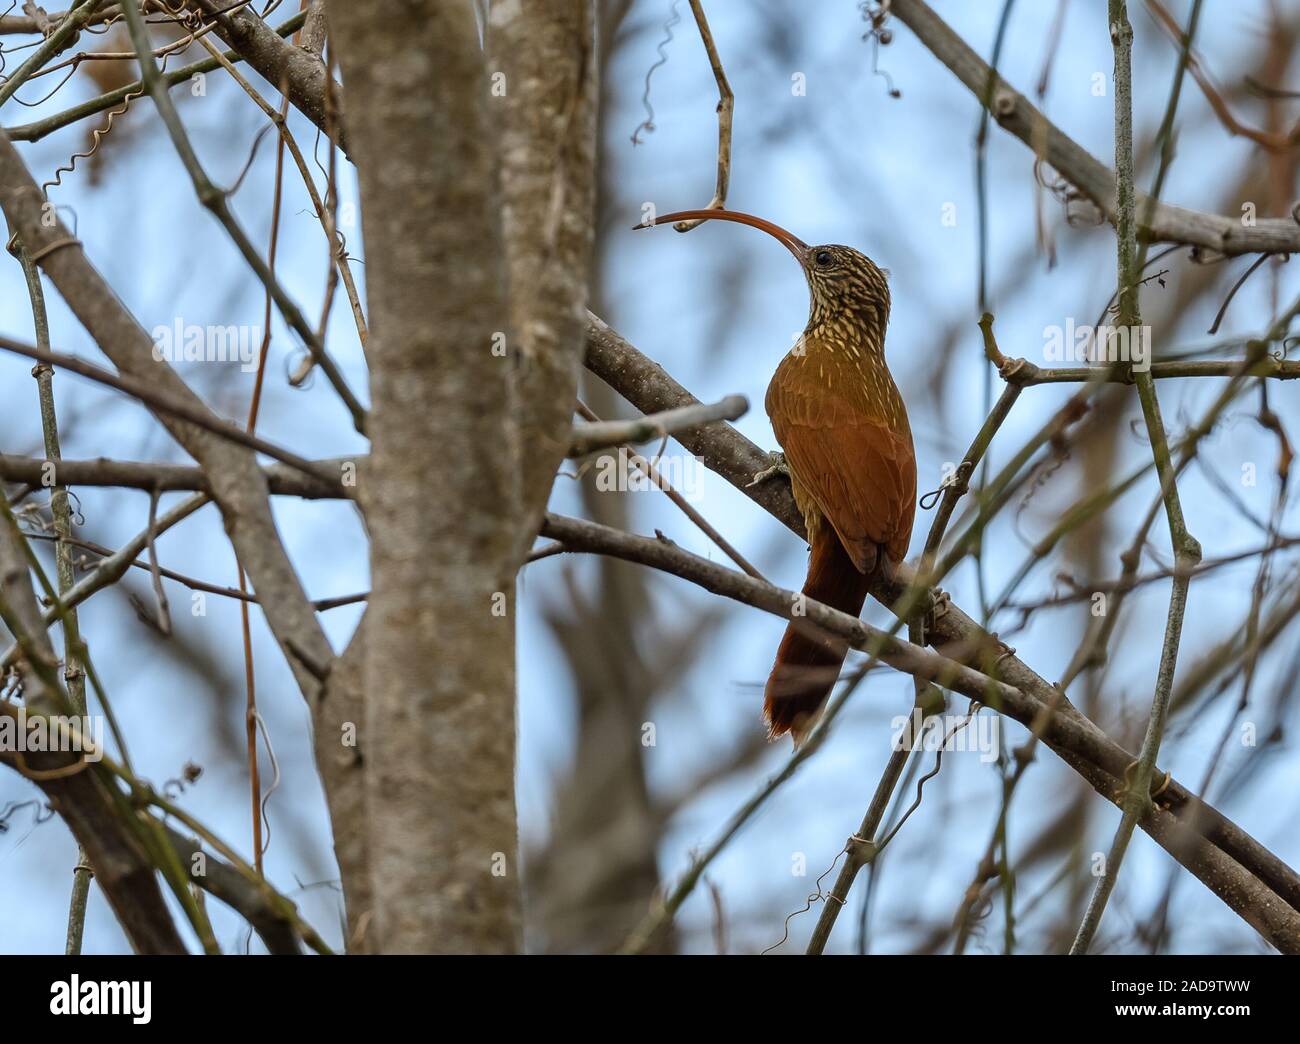 A Red-billed Scythebill (Campylorhamphus trochilirostris) foraging with its long and curved bill. Minas Gerais, NE Brazil, South America. Stock Photo